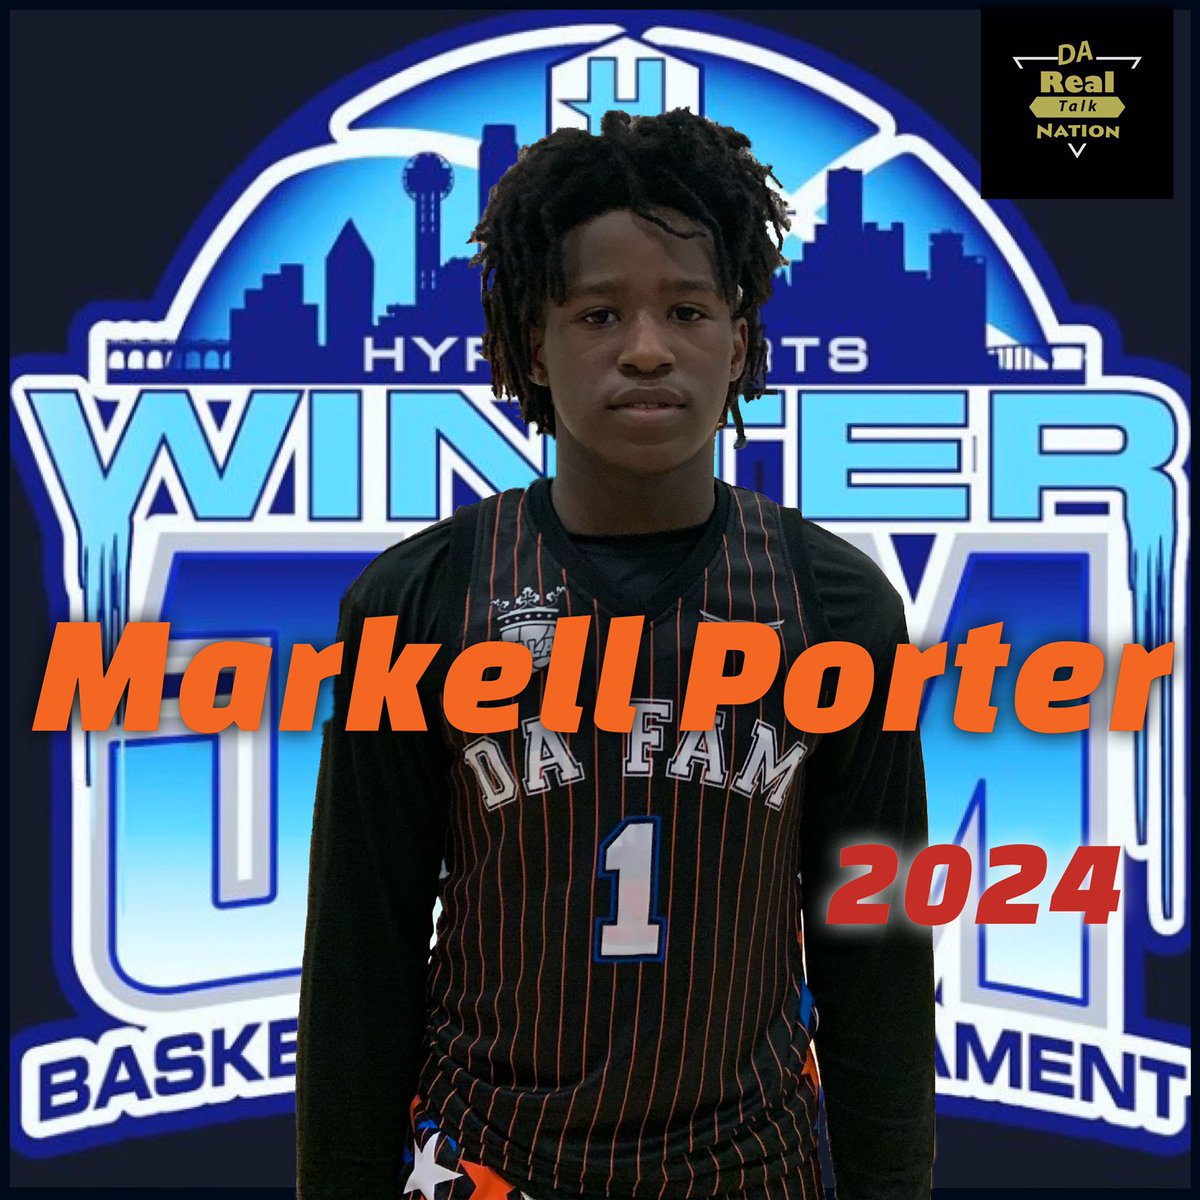 @hypesports #WinterJam2020 introduced an upcoming player that is starting to make his move, DA FAM2024 guard MARKELL PORTER (Duncanville, TX) has game! Makes plays on both ends! Getting 2 the paint & finishing 💪 ain’t nothing 4 this dude! Real good 1st step! #DaREALtalkNation